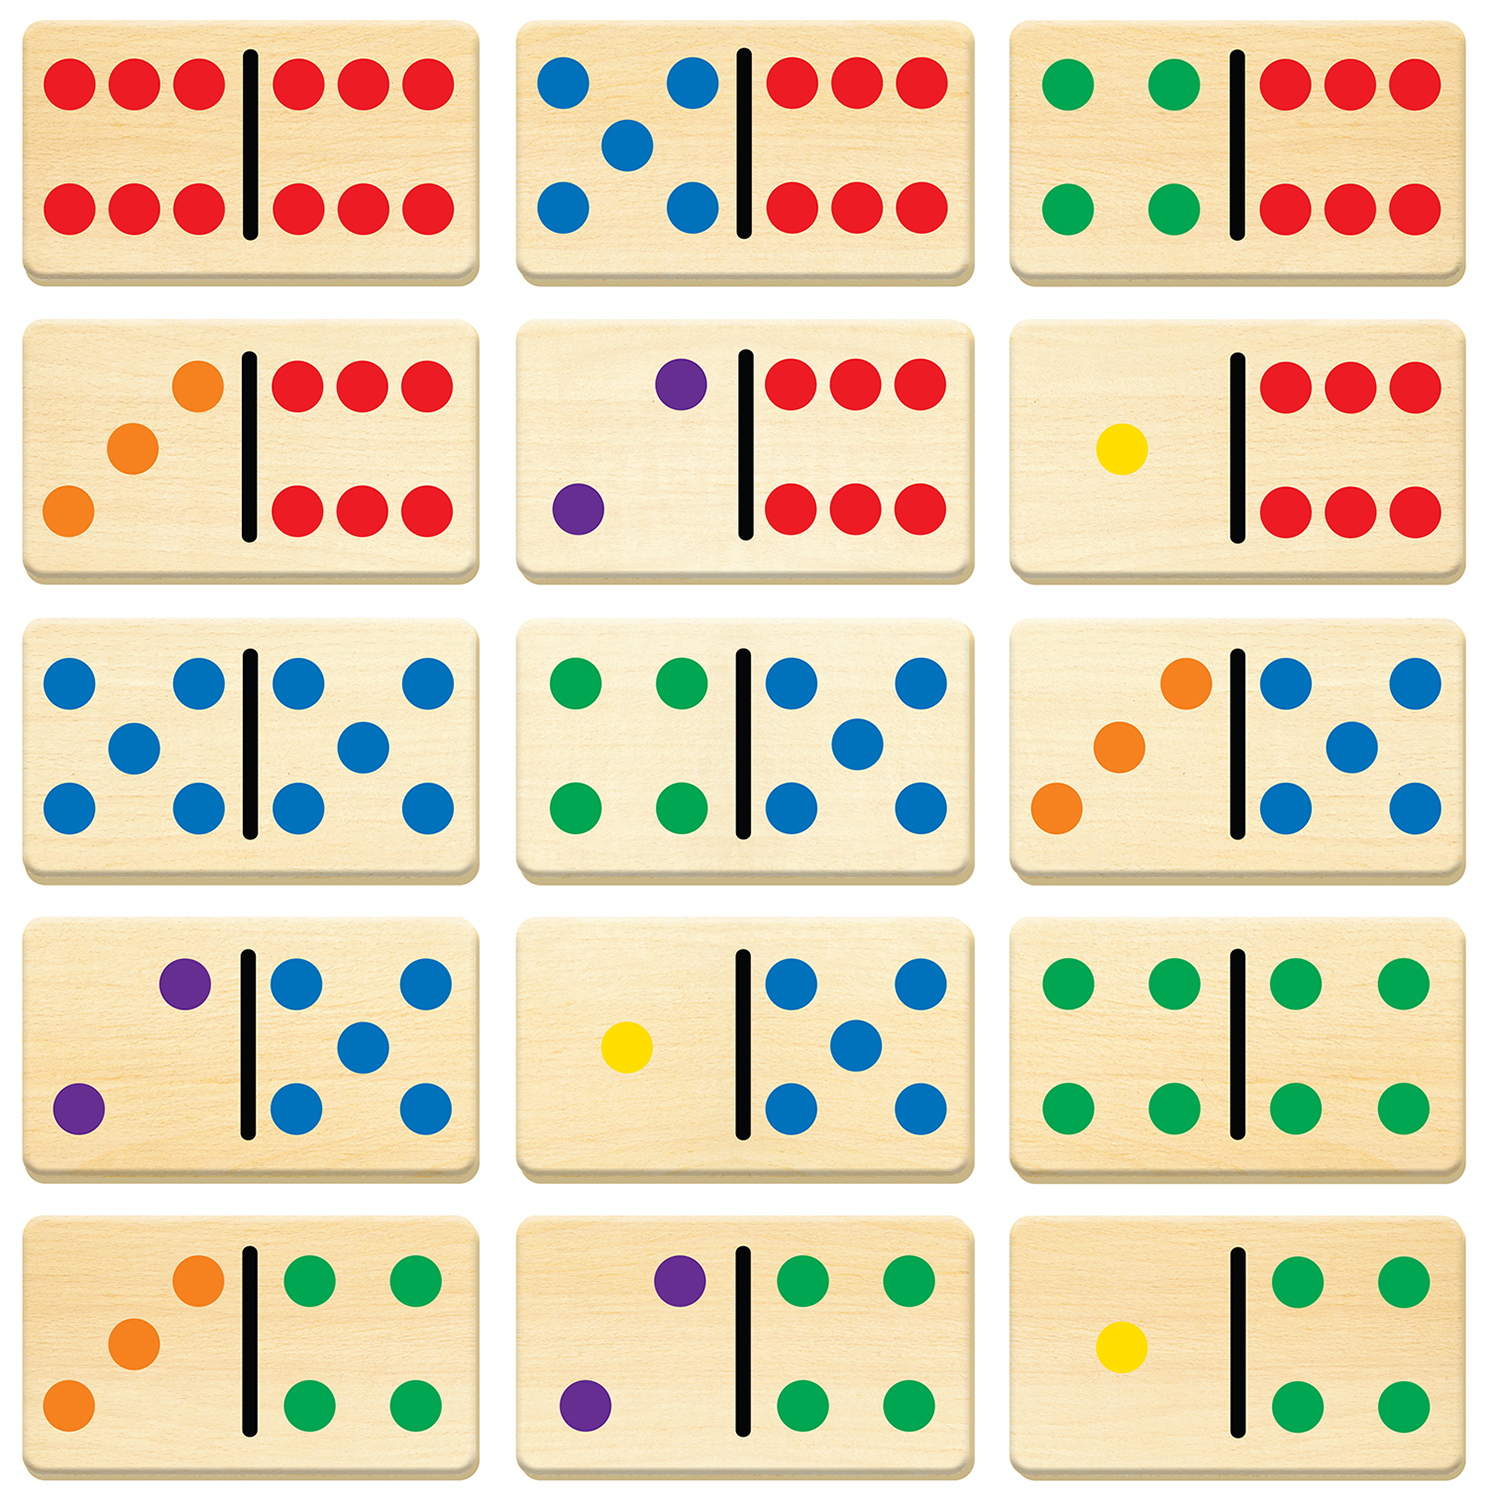 domino-dots-rgs-group